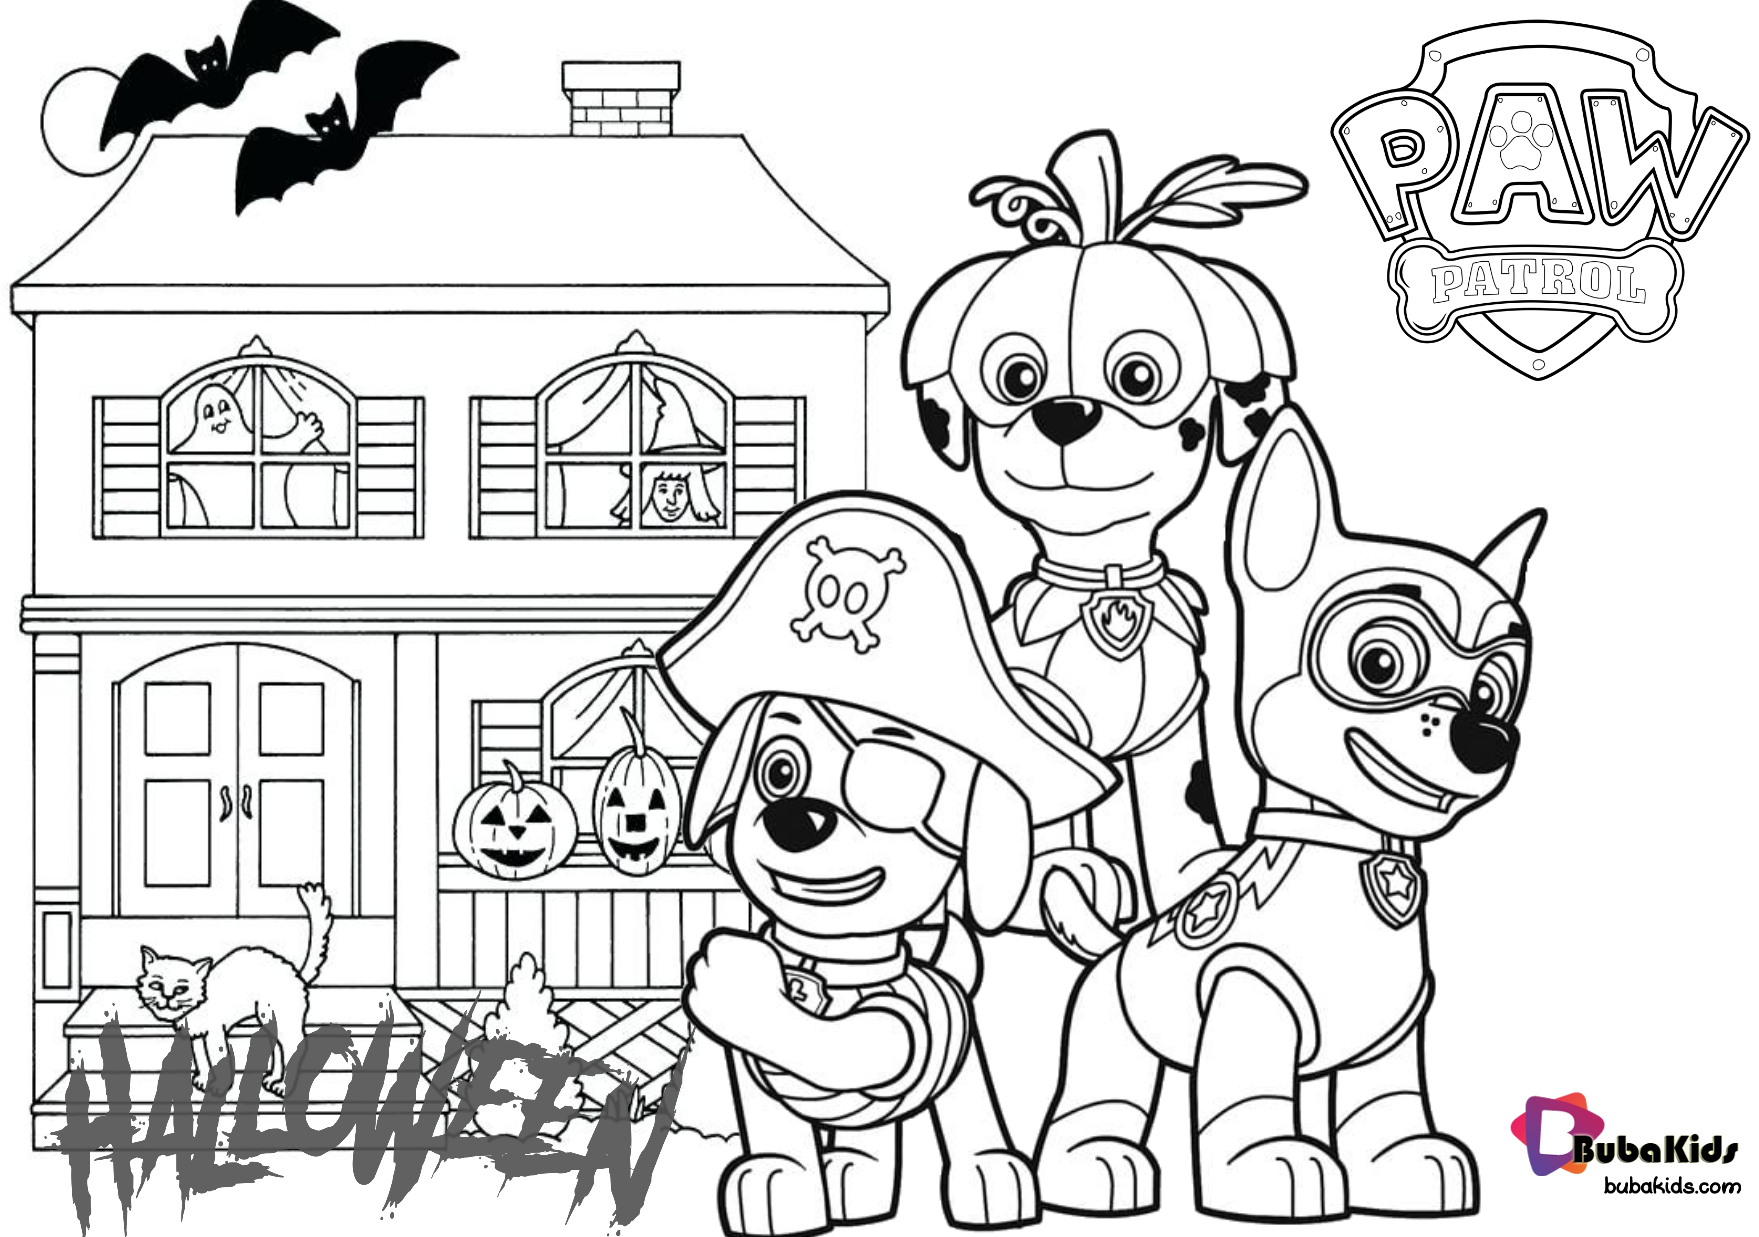 Paw patrol halloween haunted house coloring pages. Wallpaper